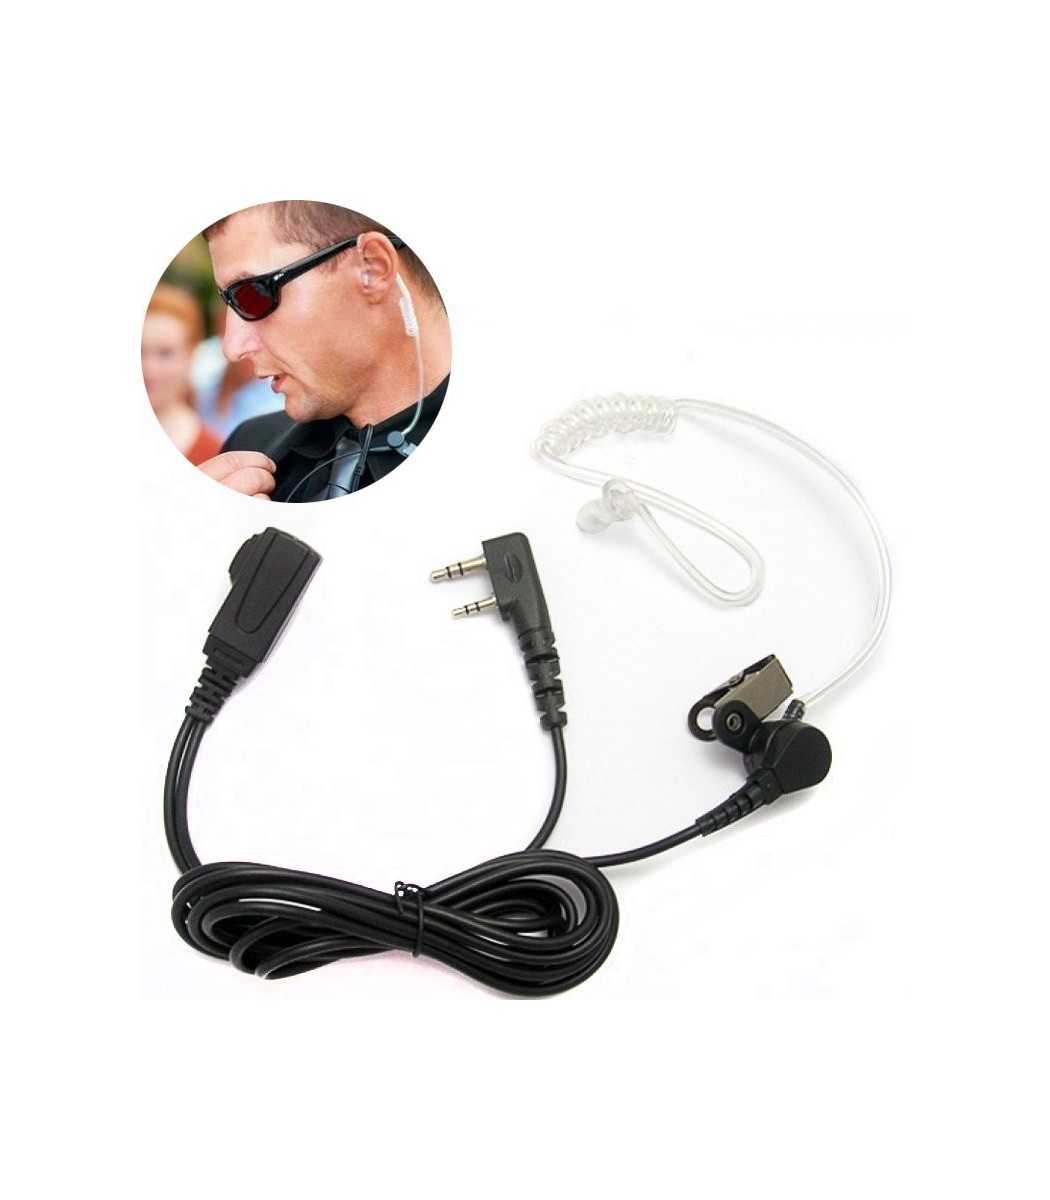 Hands Free Headset for Baofeng UV-5R BF-320 BF-888 BF-888S BF-999 BF-999S